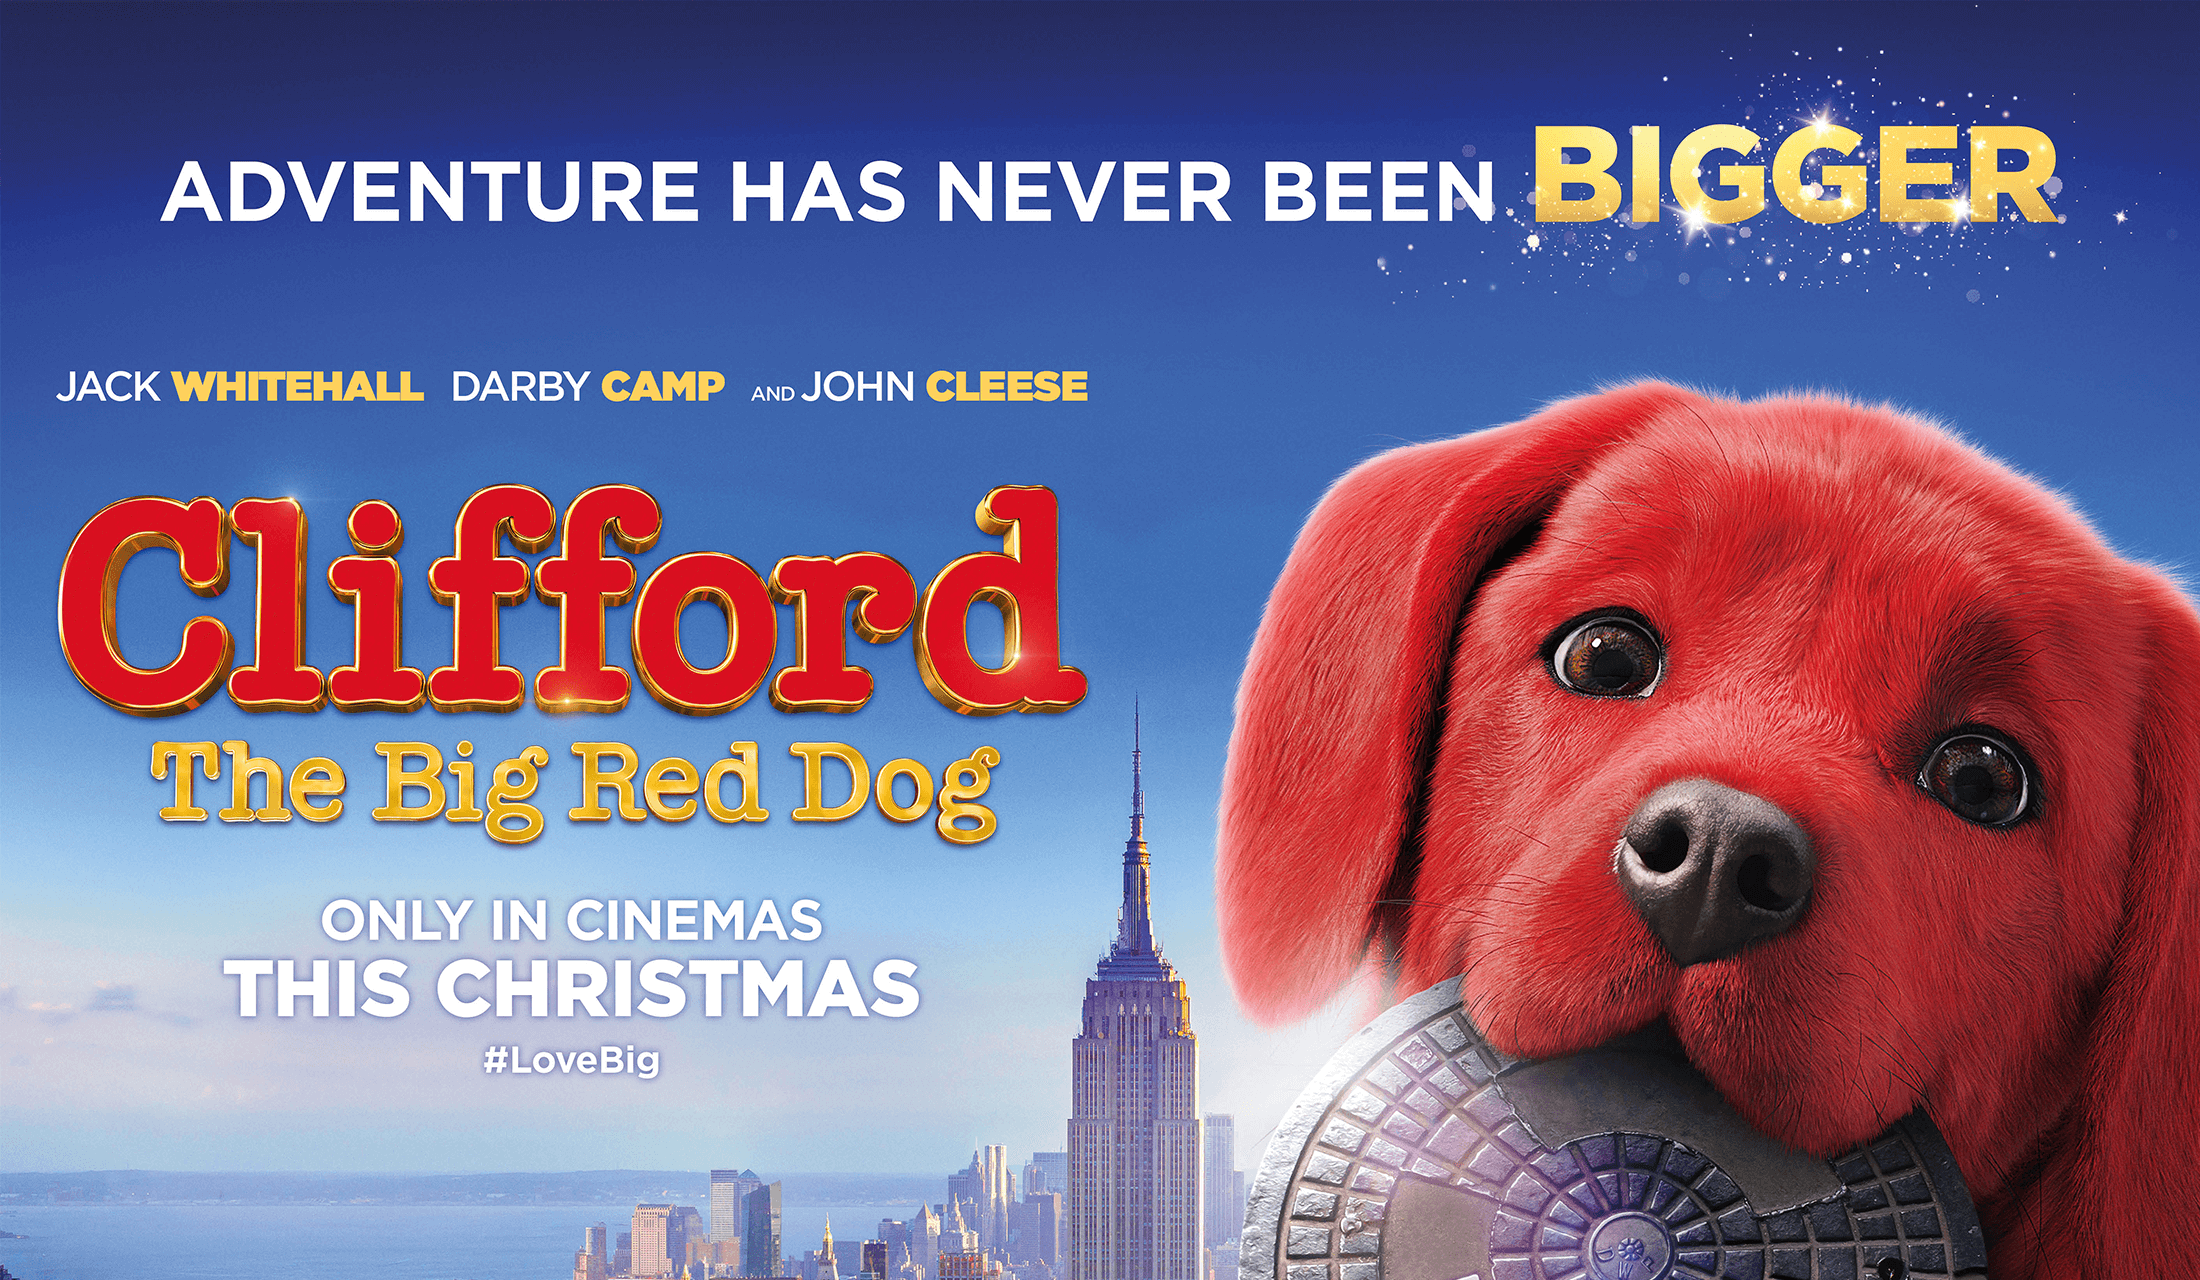 Clifford the Big Red Dog - film coming out soon!